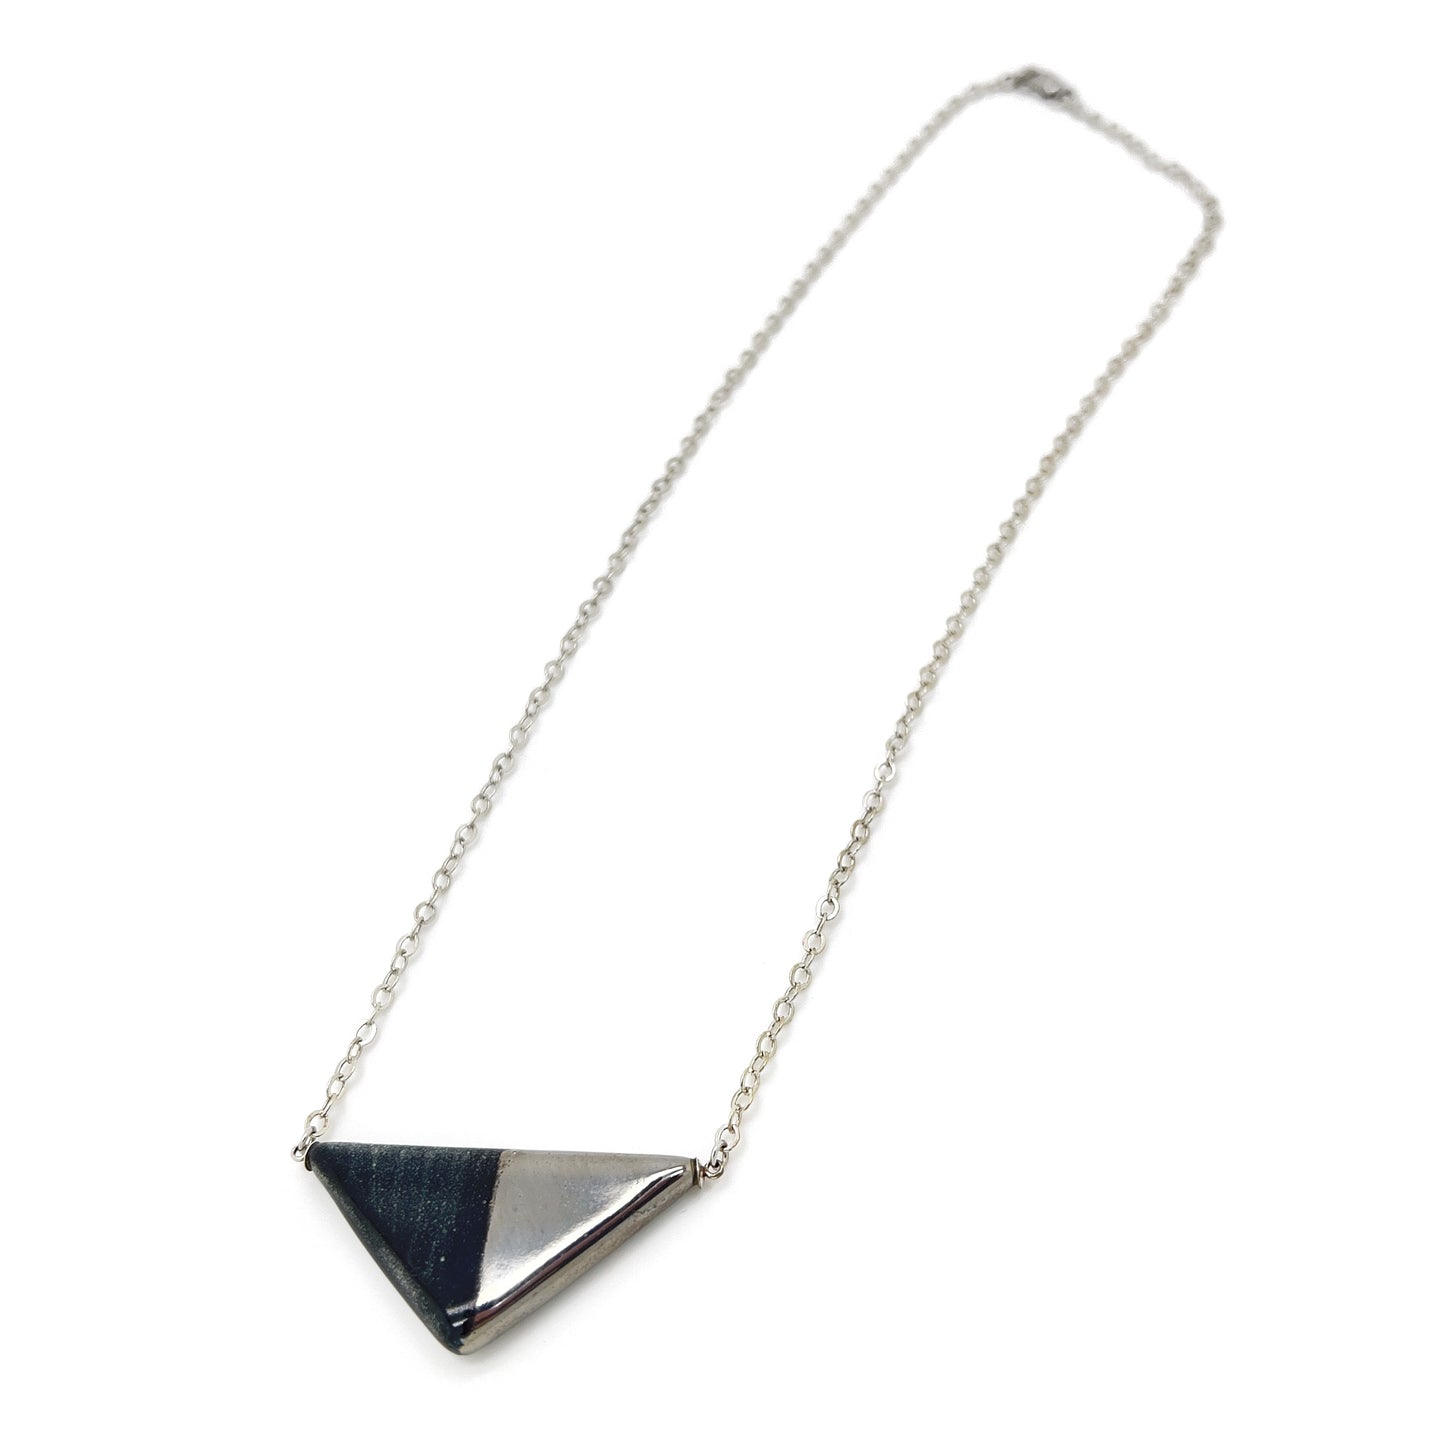 Black and platinum triangle necklace